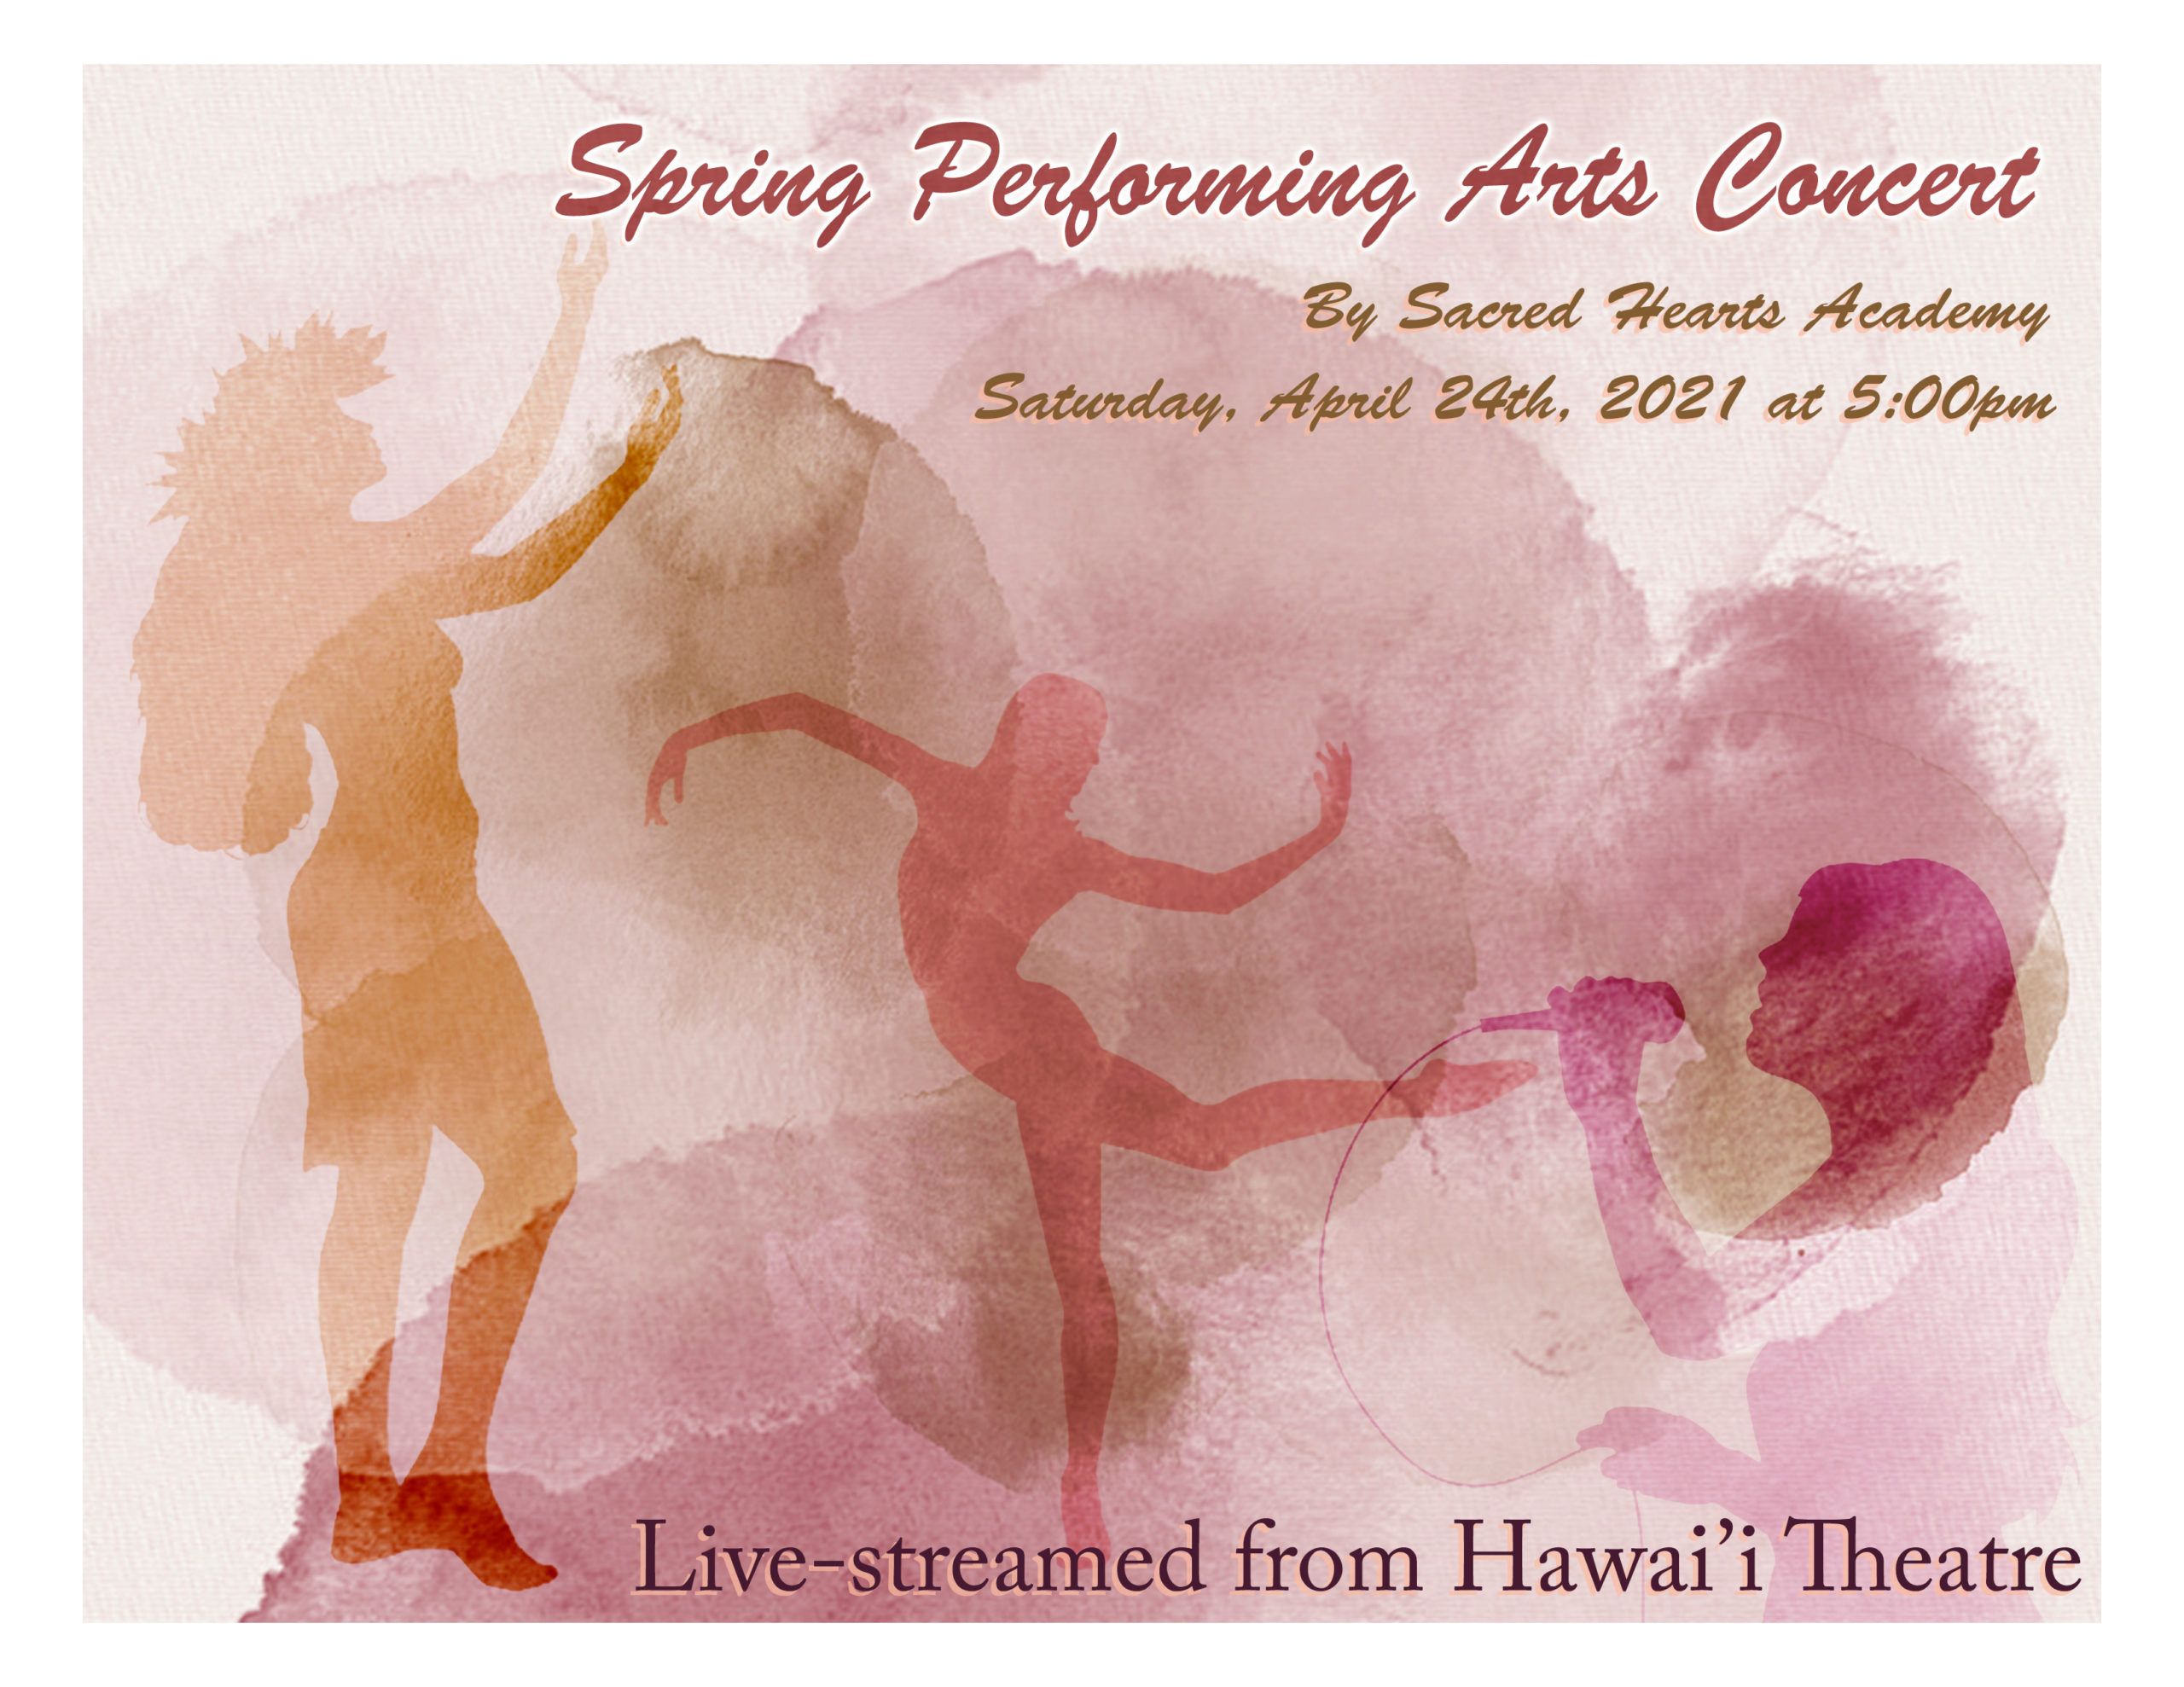 SACRED-HEARTS-PRING-PERFORMING-ARTS-scaled